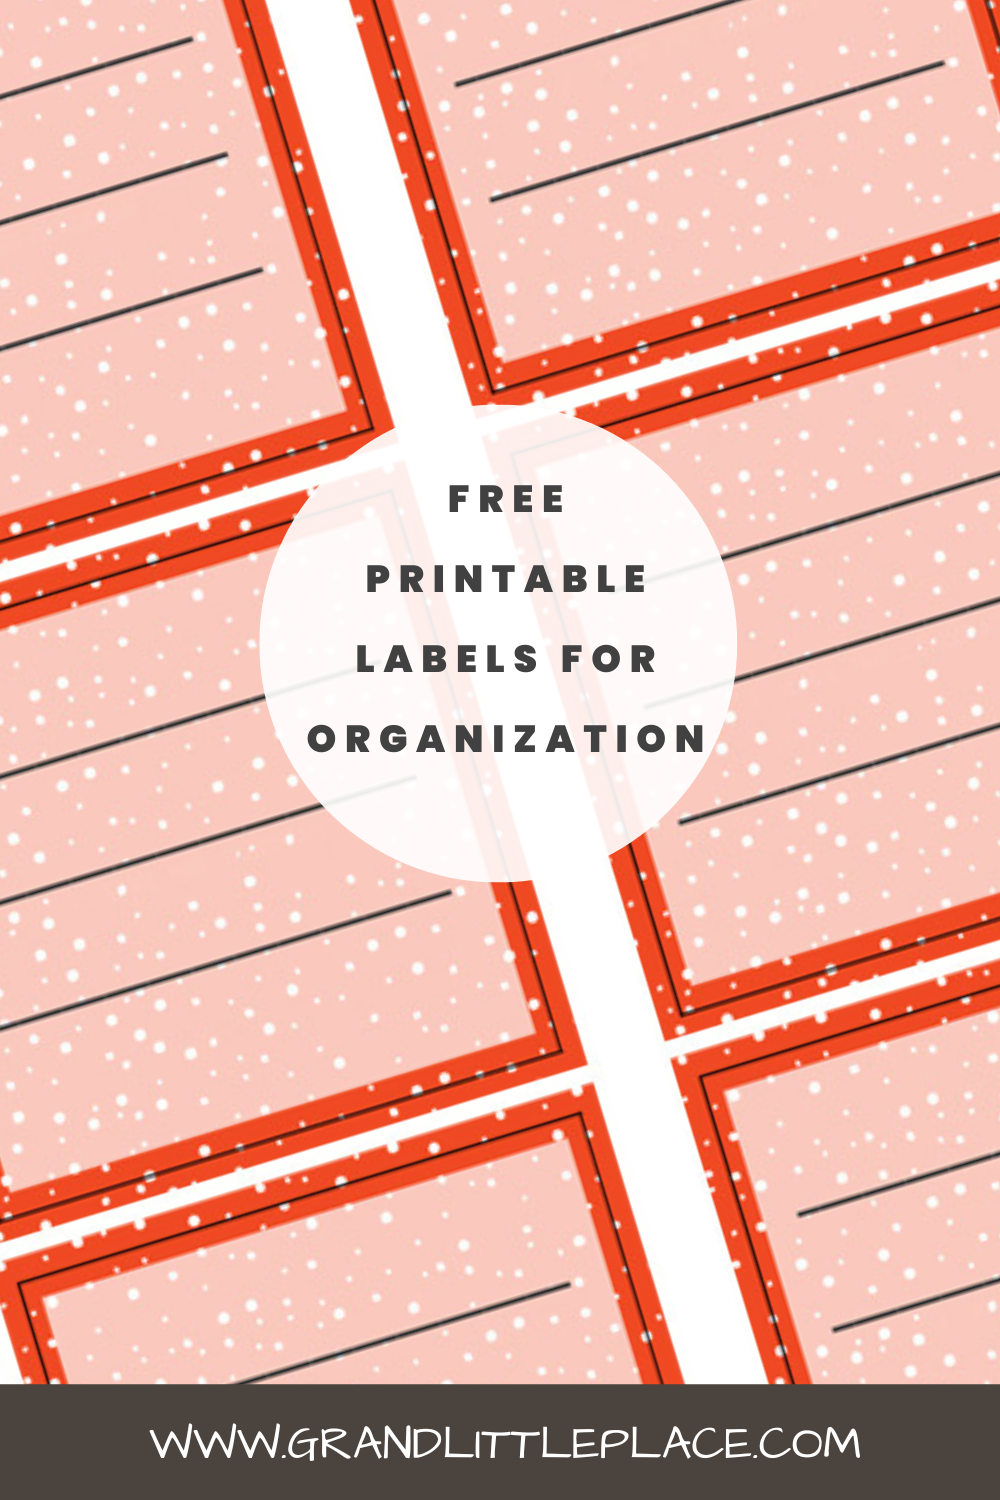 FREE PRINTABLE LABELS FOR ORGANIZATION